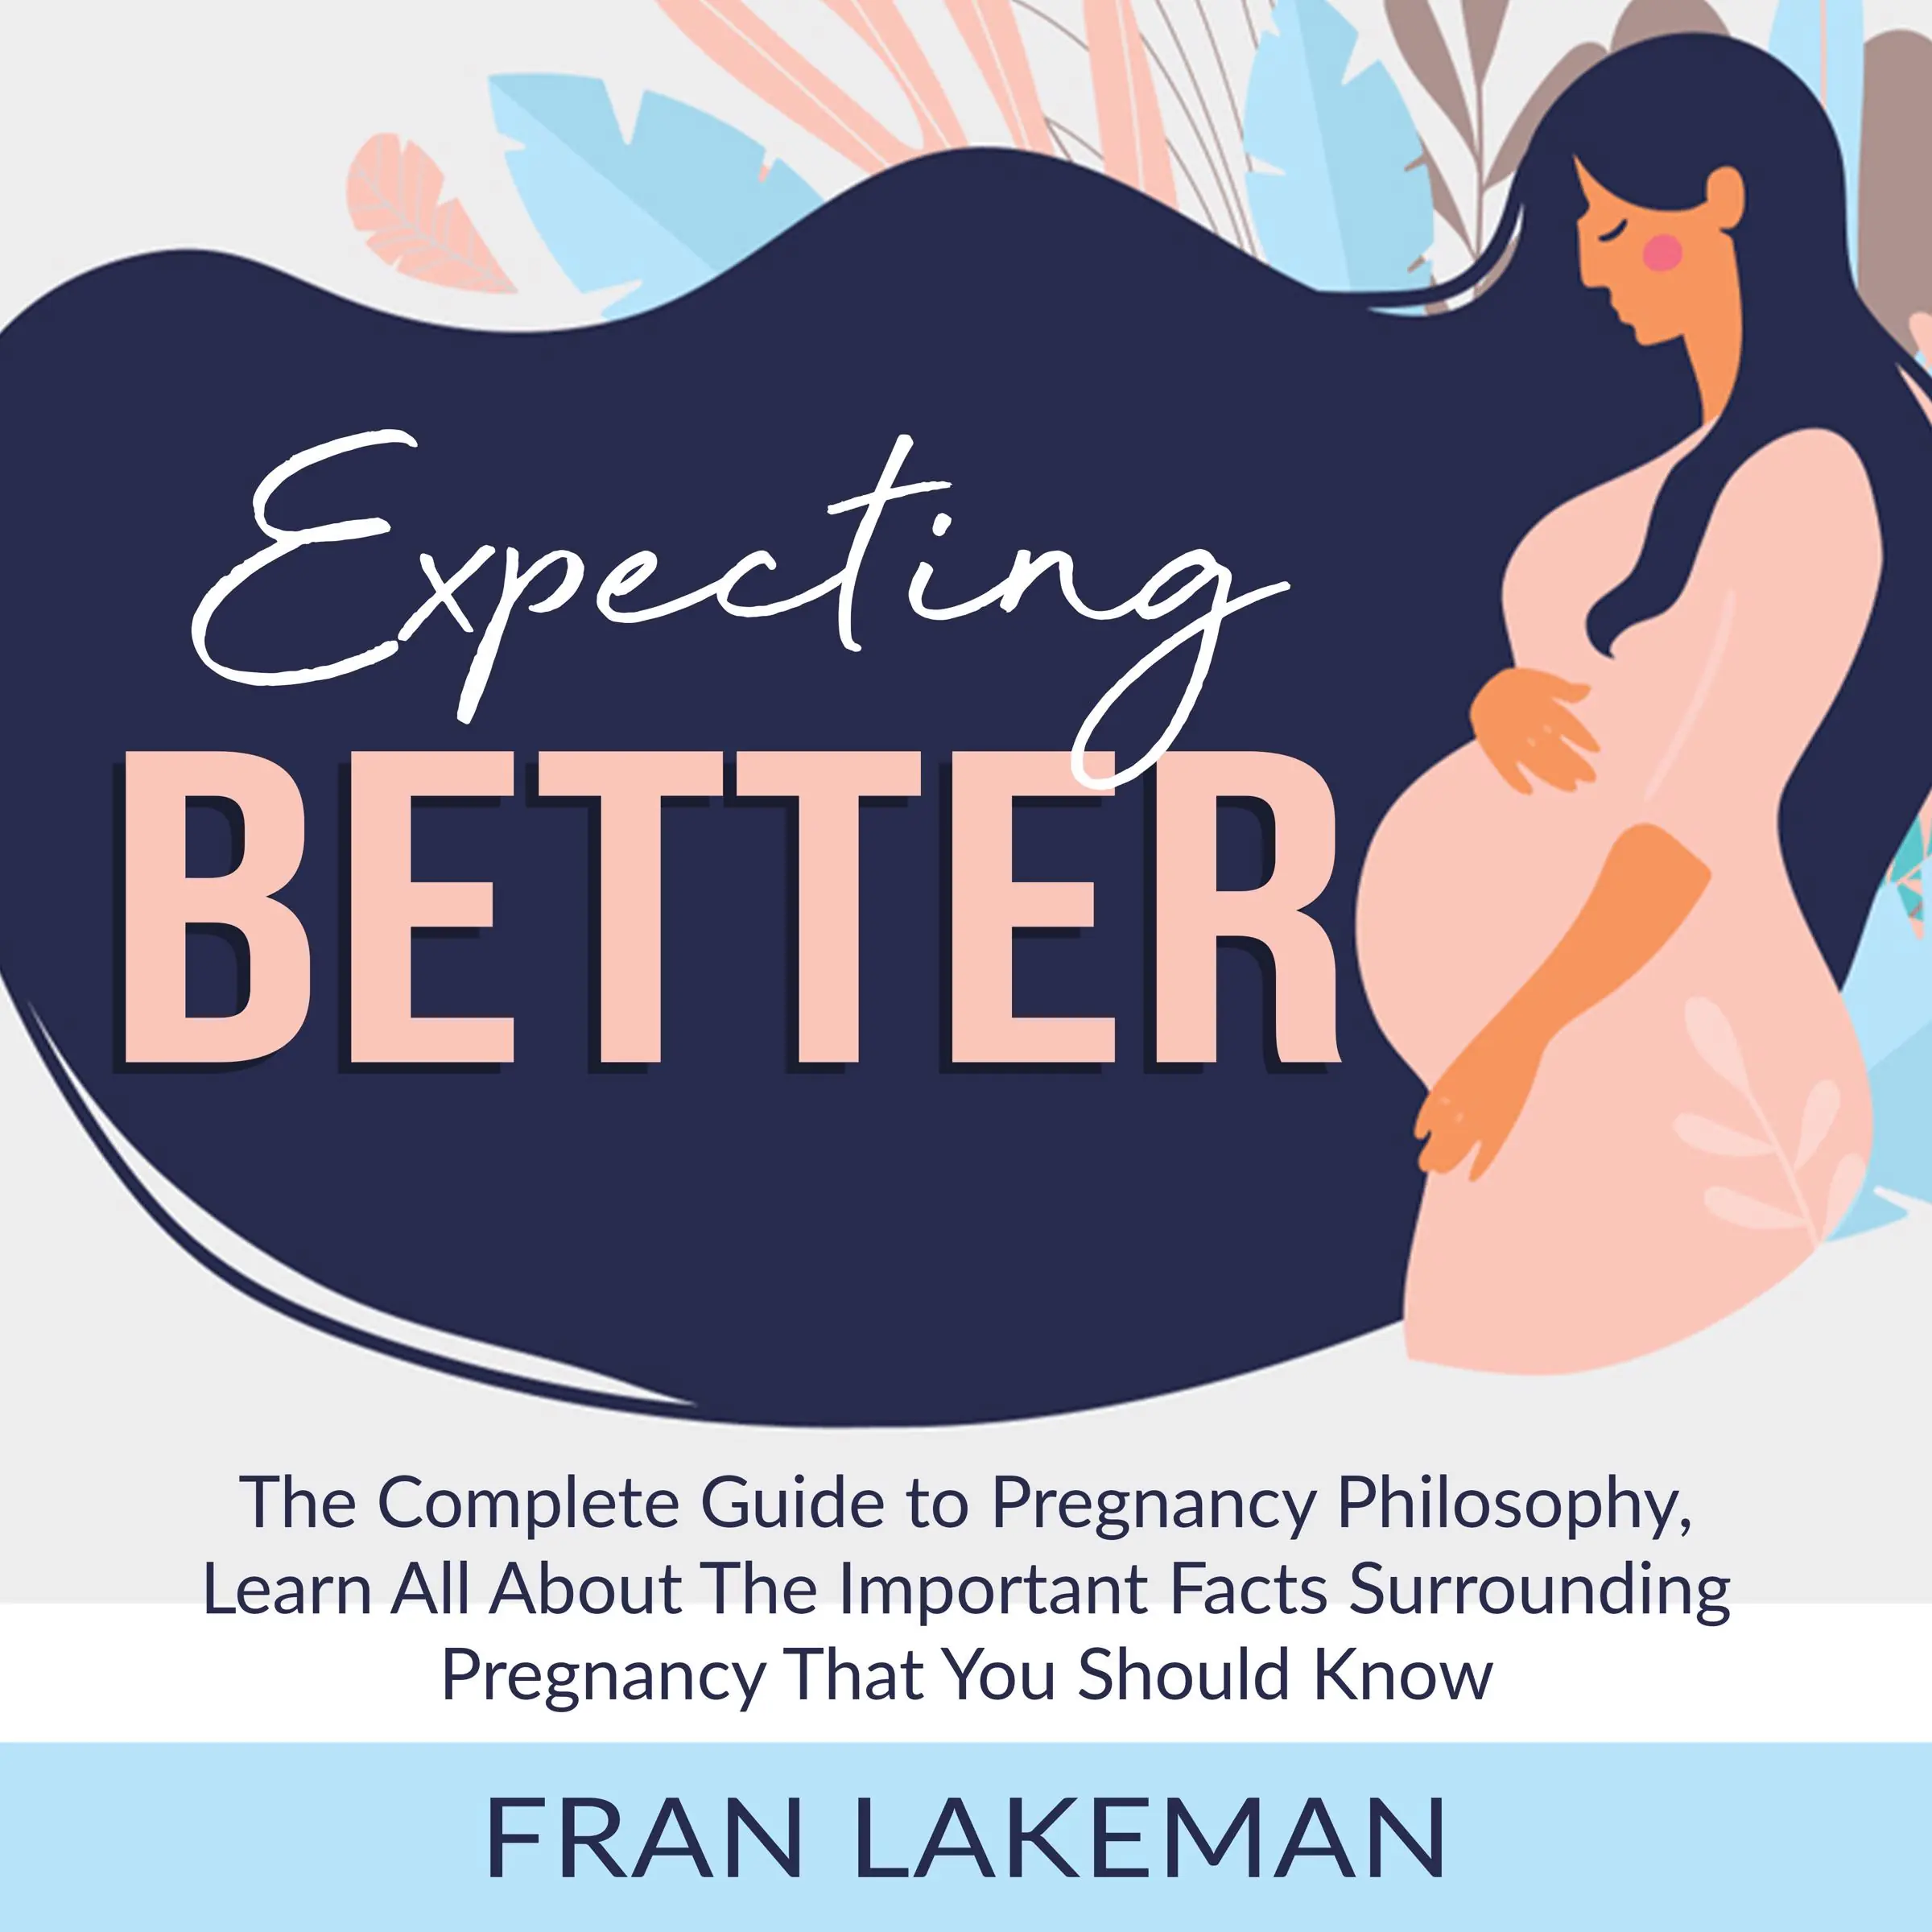 Expecting Better: The Complete Guide to Pregnancy Philosophy, Learn All About The Important Facts Surrounding Pregnancy That You Should Know Audiobook by Fran Lakeman